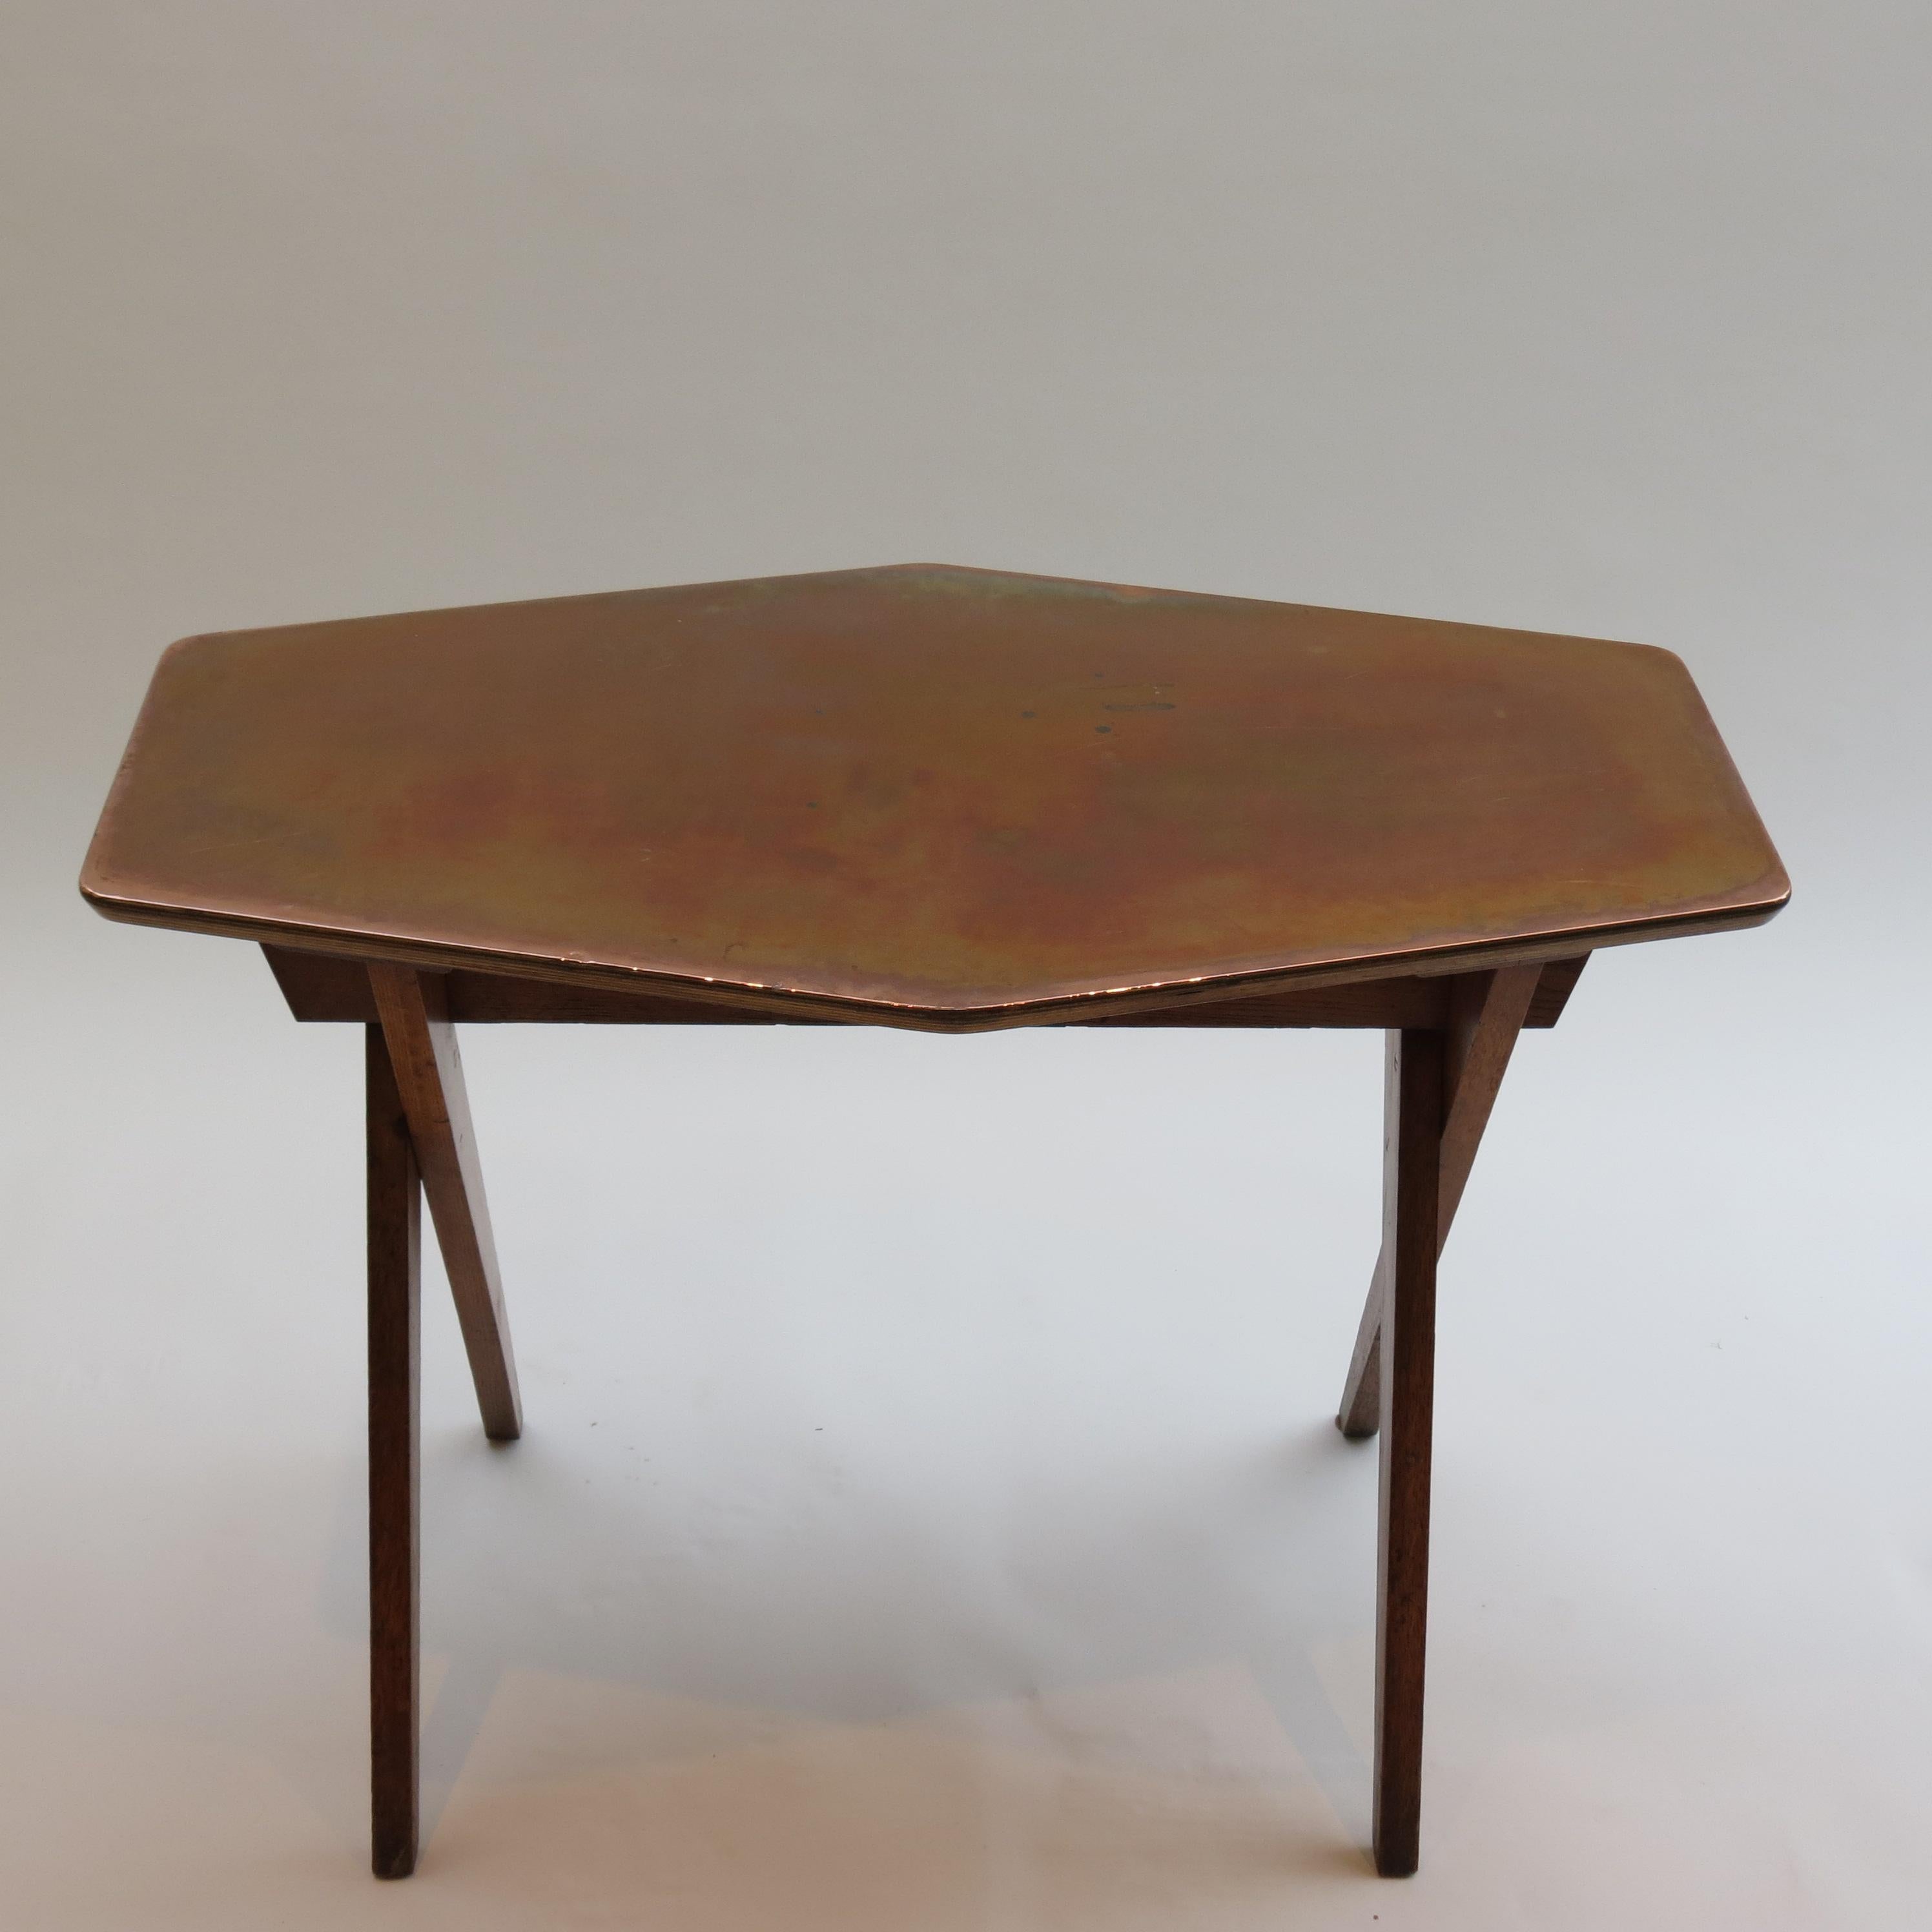 20th Century Vintage Copper and Oak Hexagonal Side Table, 1950s